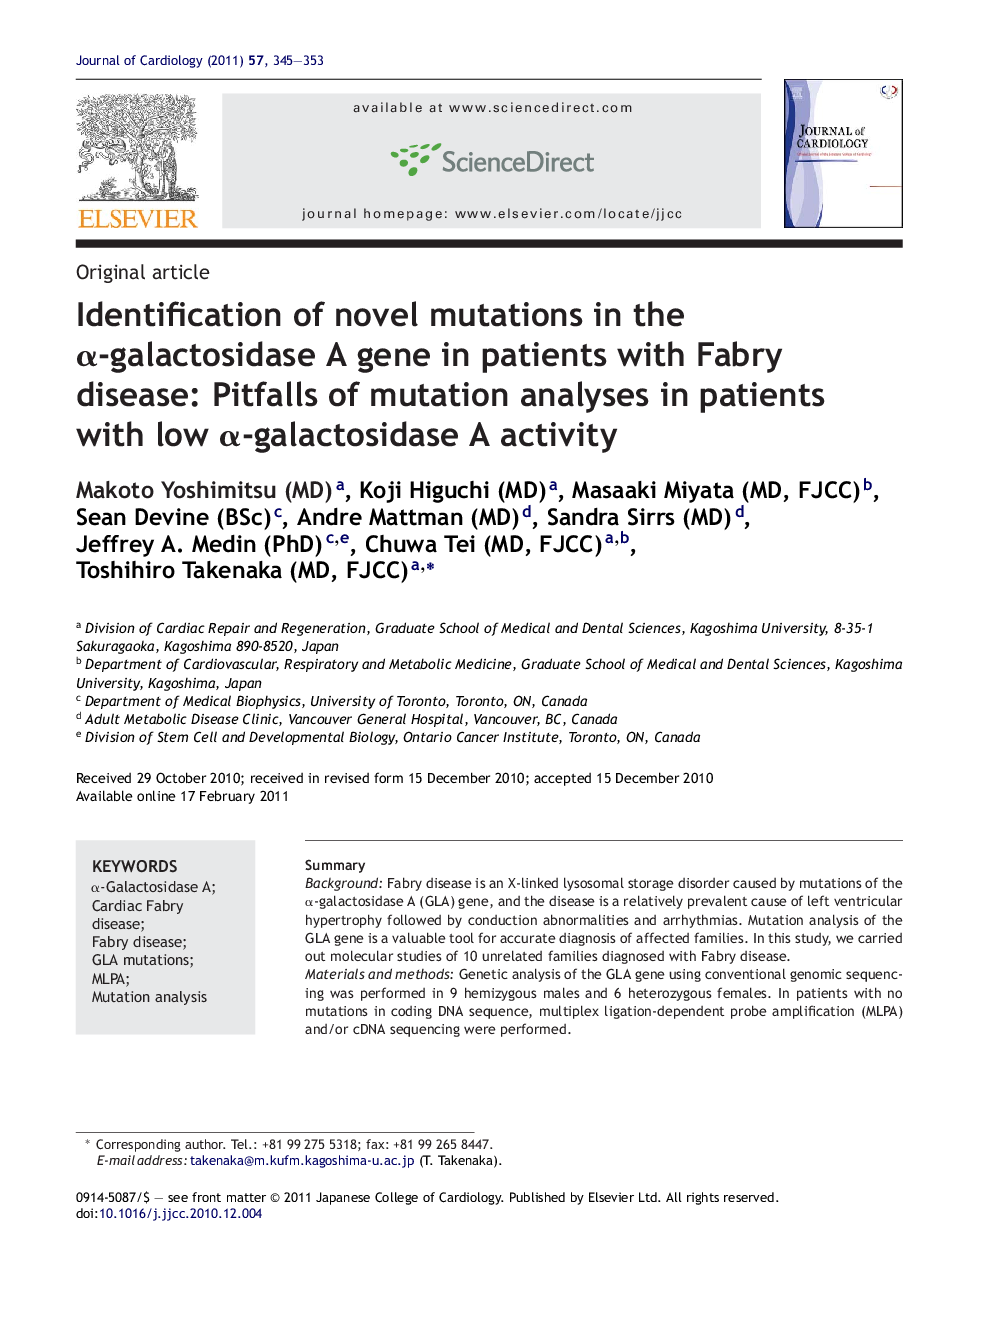 Identification of novel mutations in the α-galactosidase A gene in patients with Fabry disease: Pitfalls of mutation analyses in patients with low α-galactosidase A activity